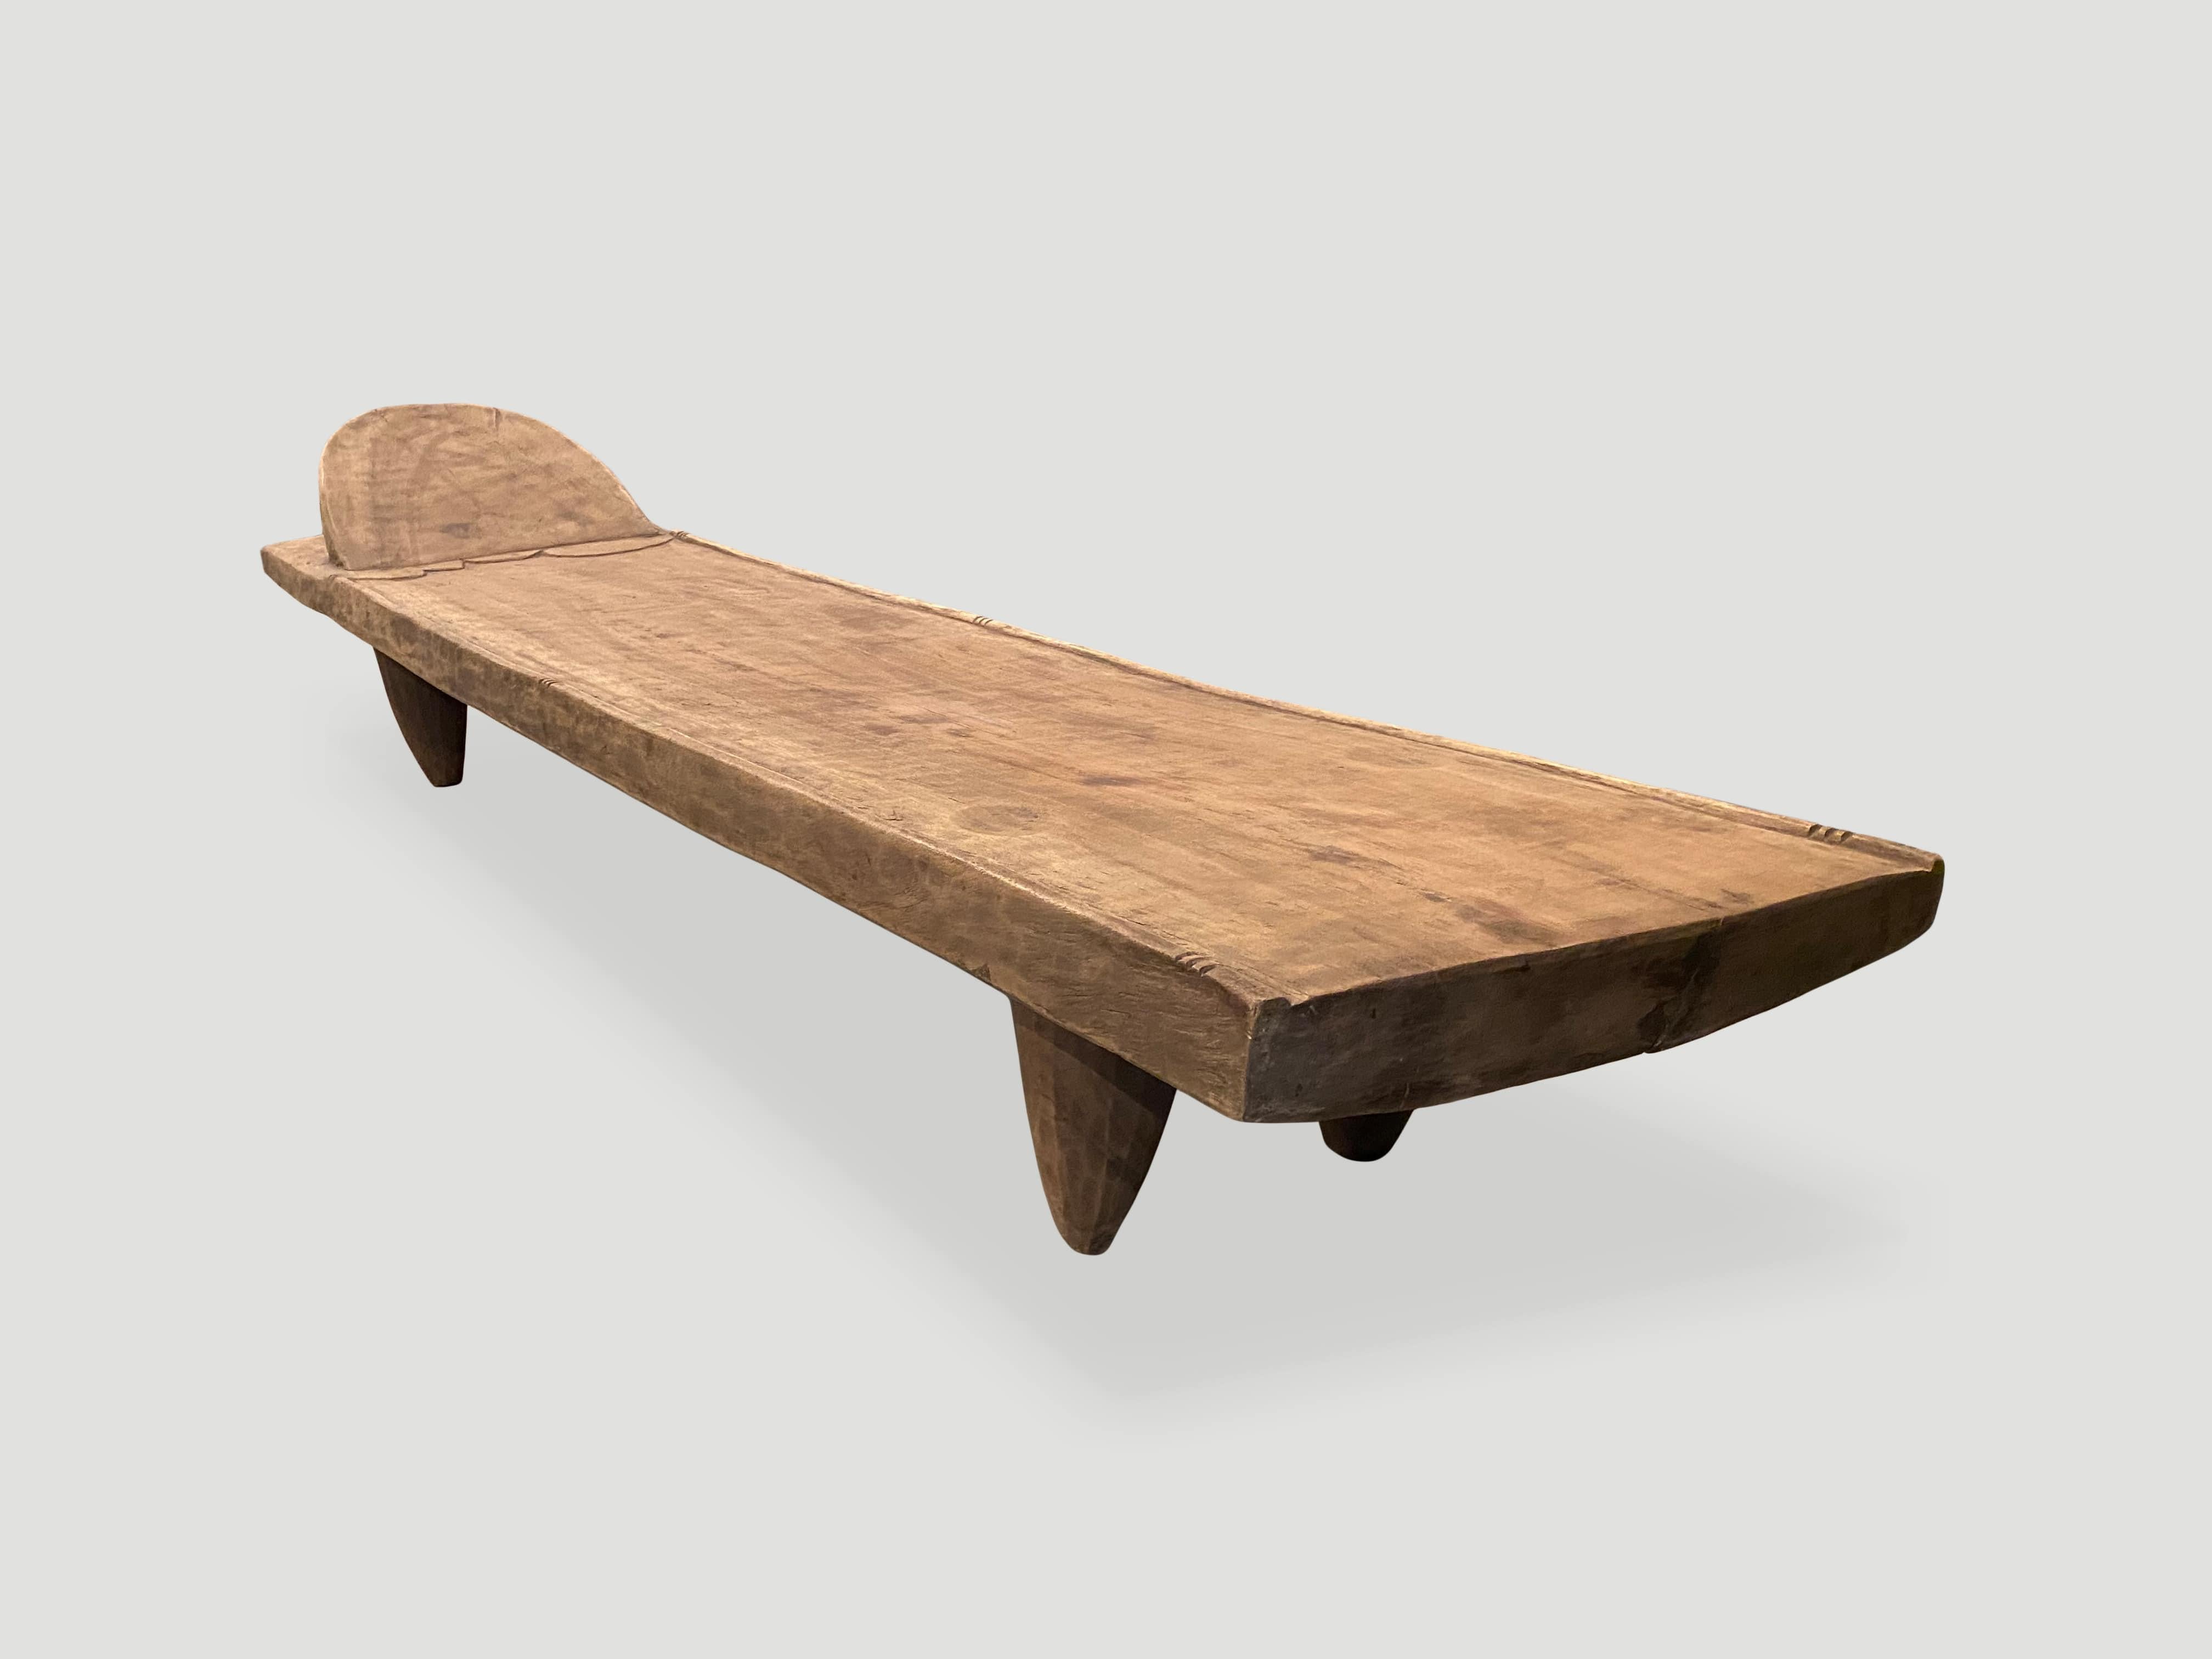 Contemporary Andrianna Shamaris Cote D’ivoire Senufu Daybed, Bench or Coffee Table For Sale